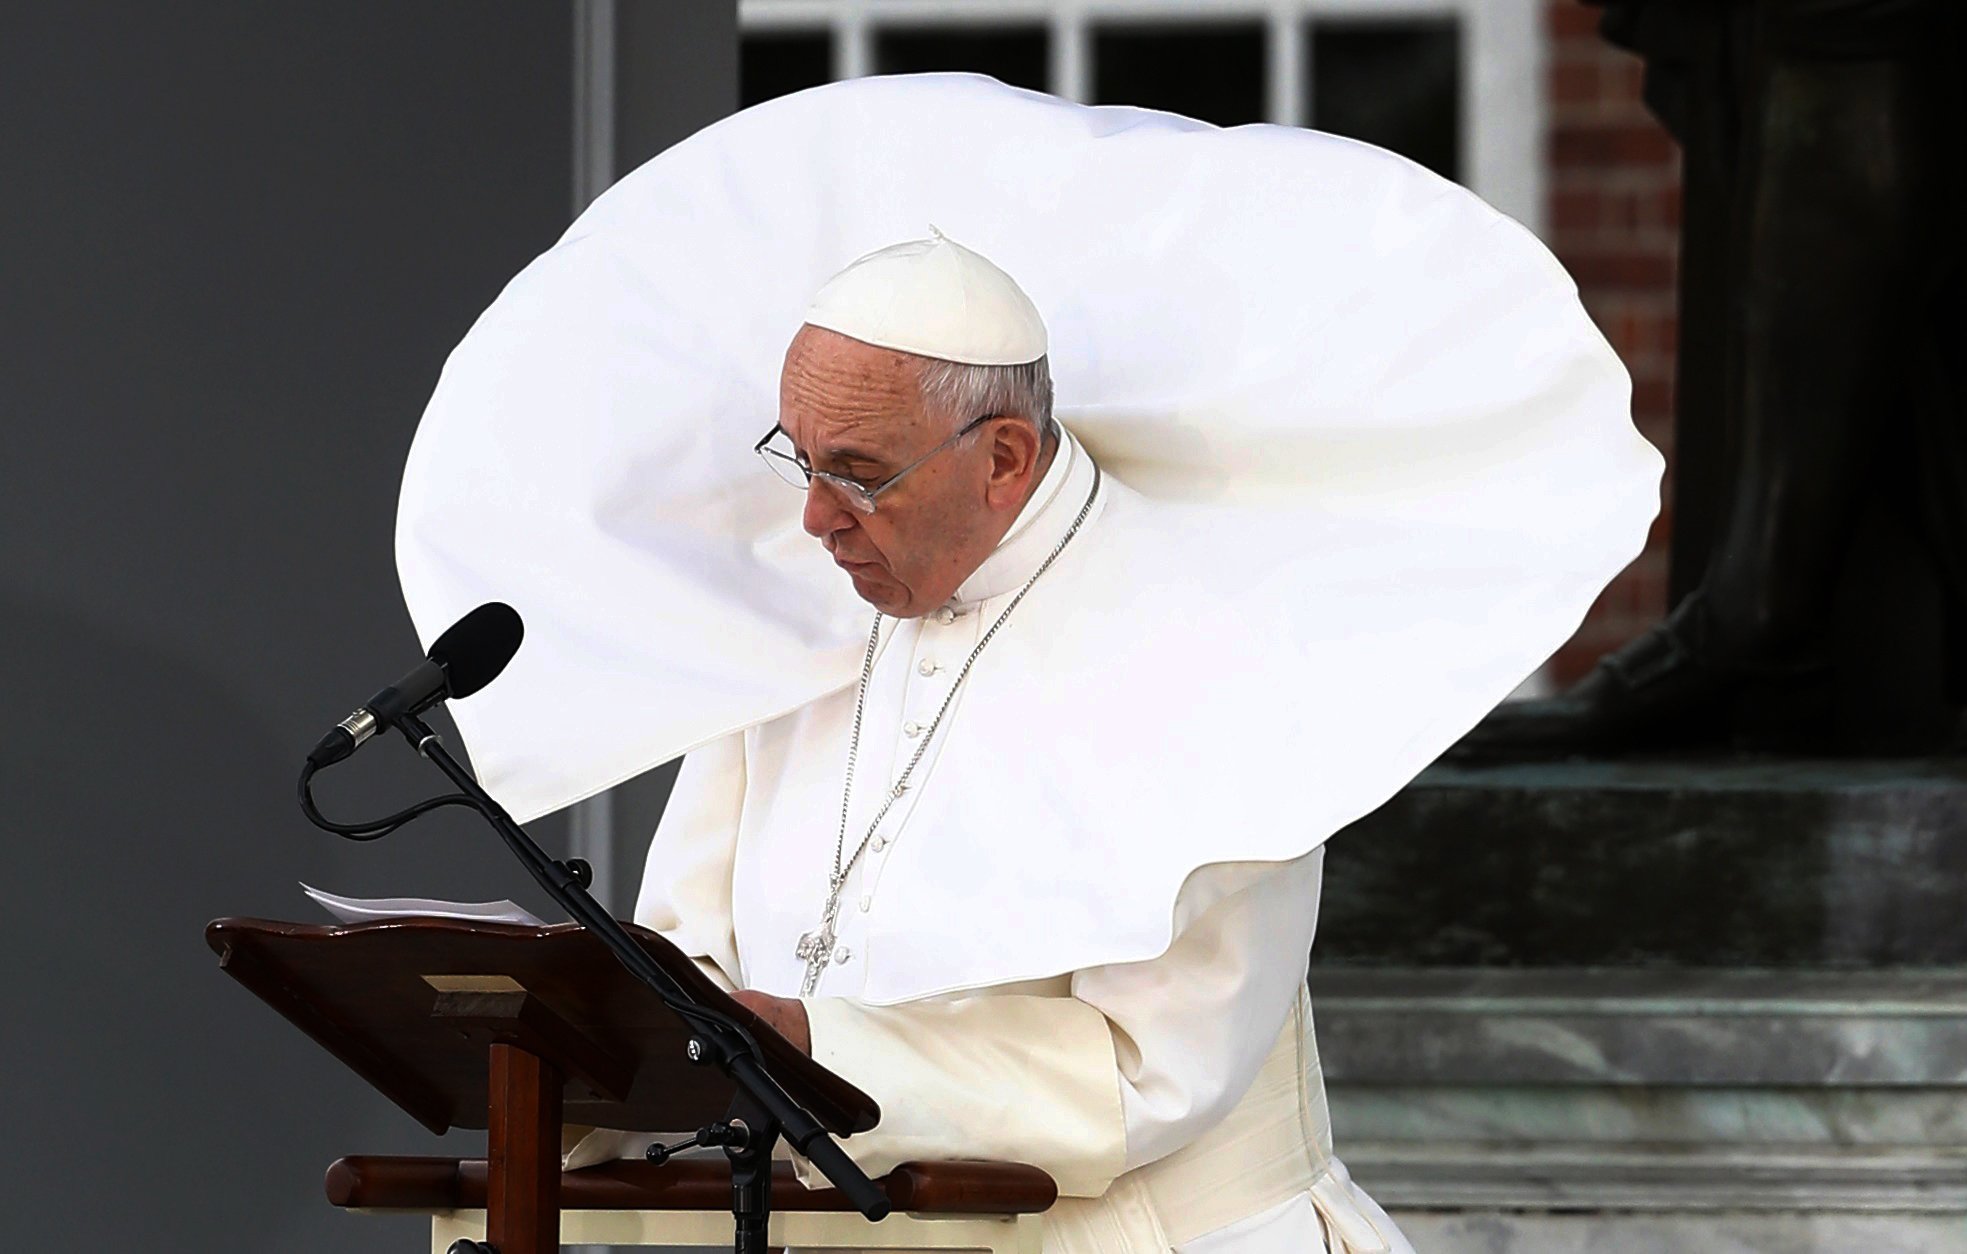 The wind lifts Pope Francis' mantle as he delivers his speech in front of Independence Hall in Philadelphia, on Sept. 26, 2015.